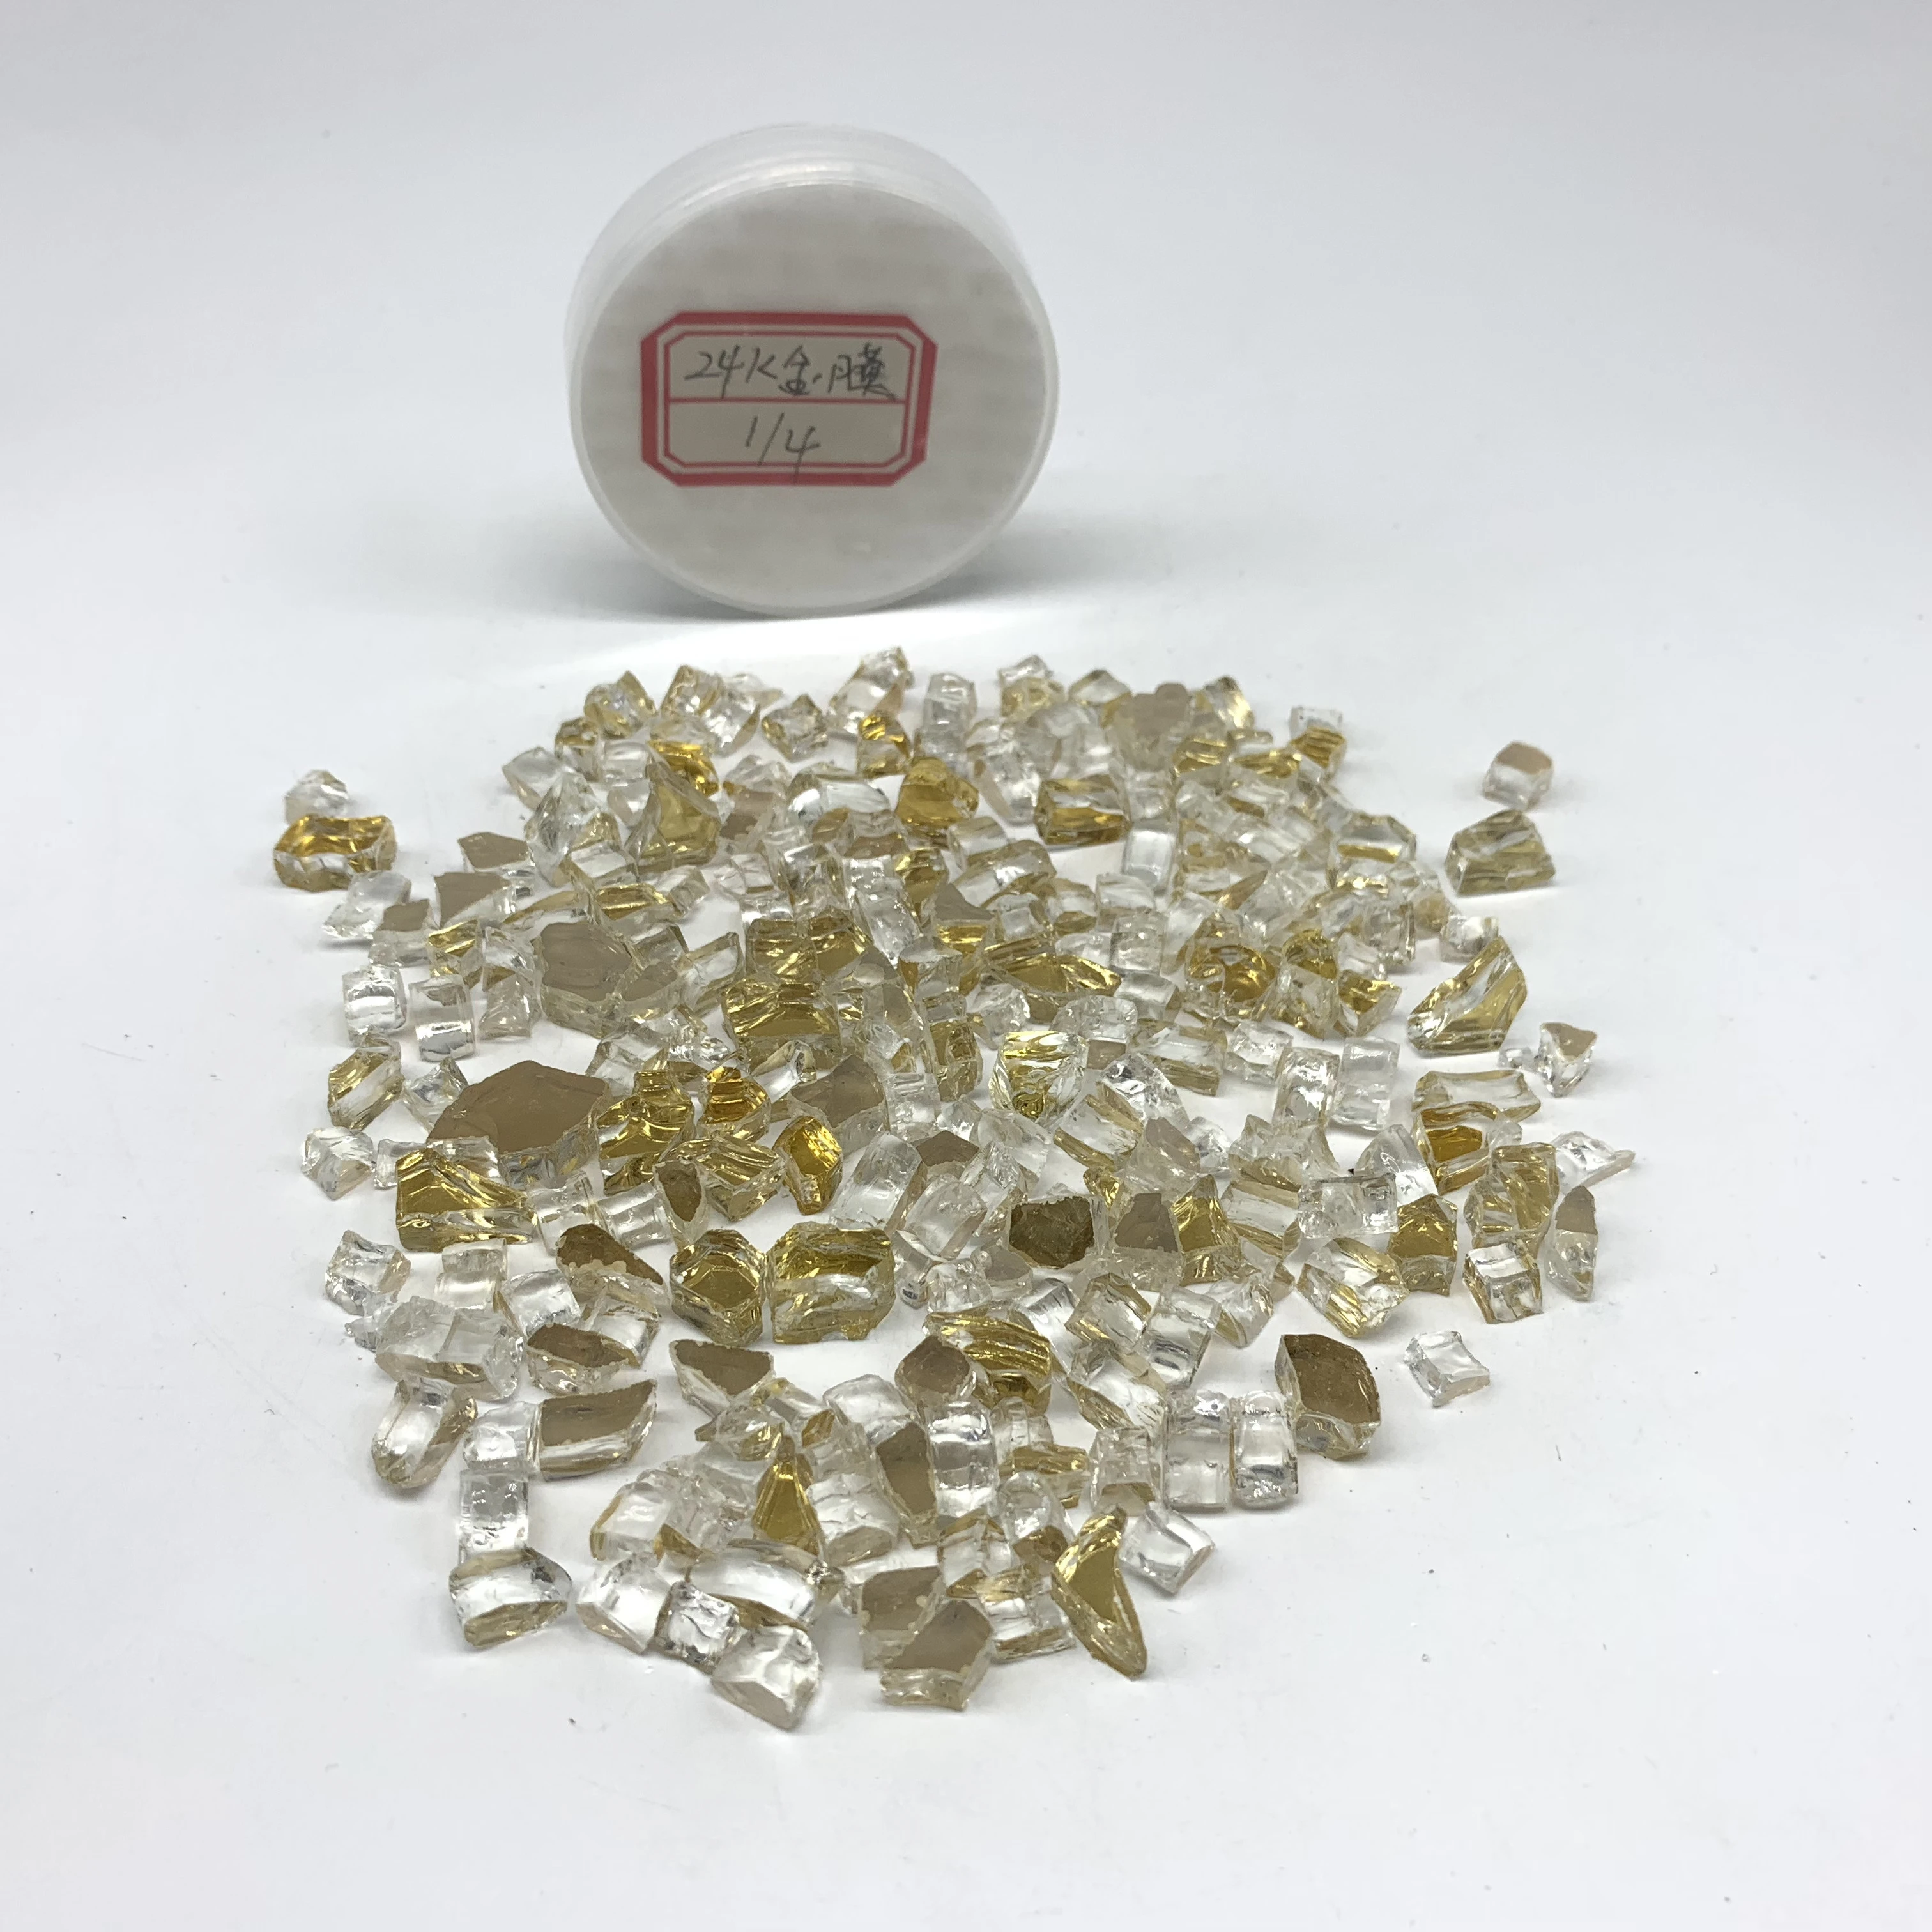 24K Gold 1/4 Reflective Tempered Fire Glass 10lbs